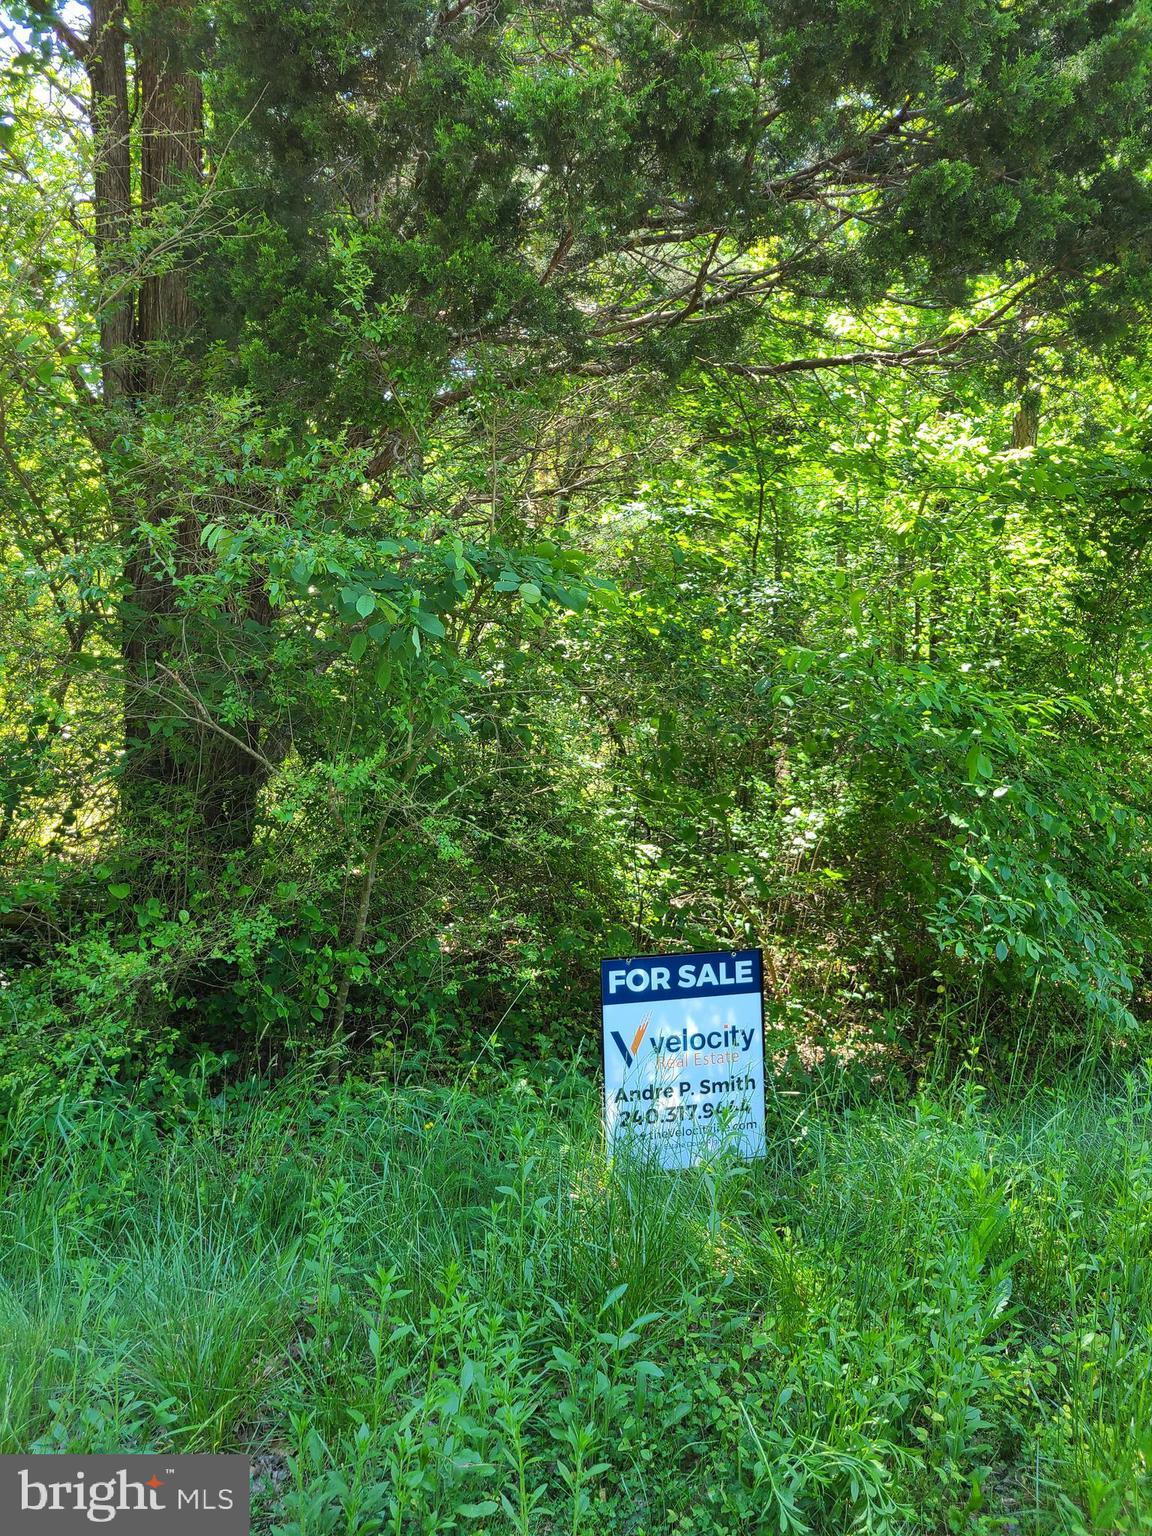 a view of a sign in a lush green forest